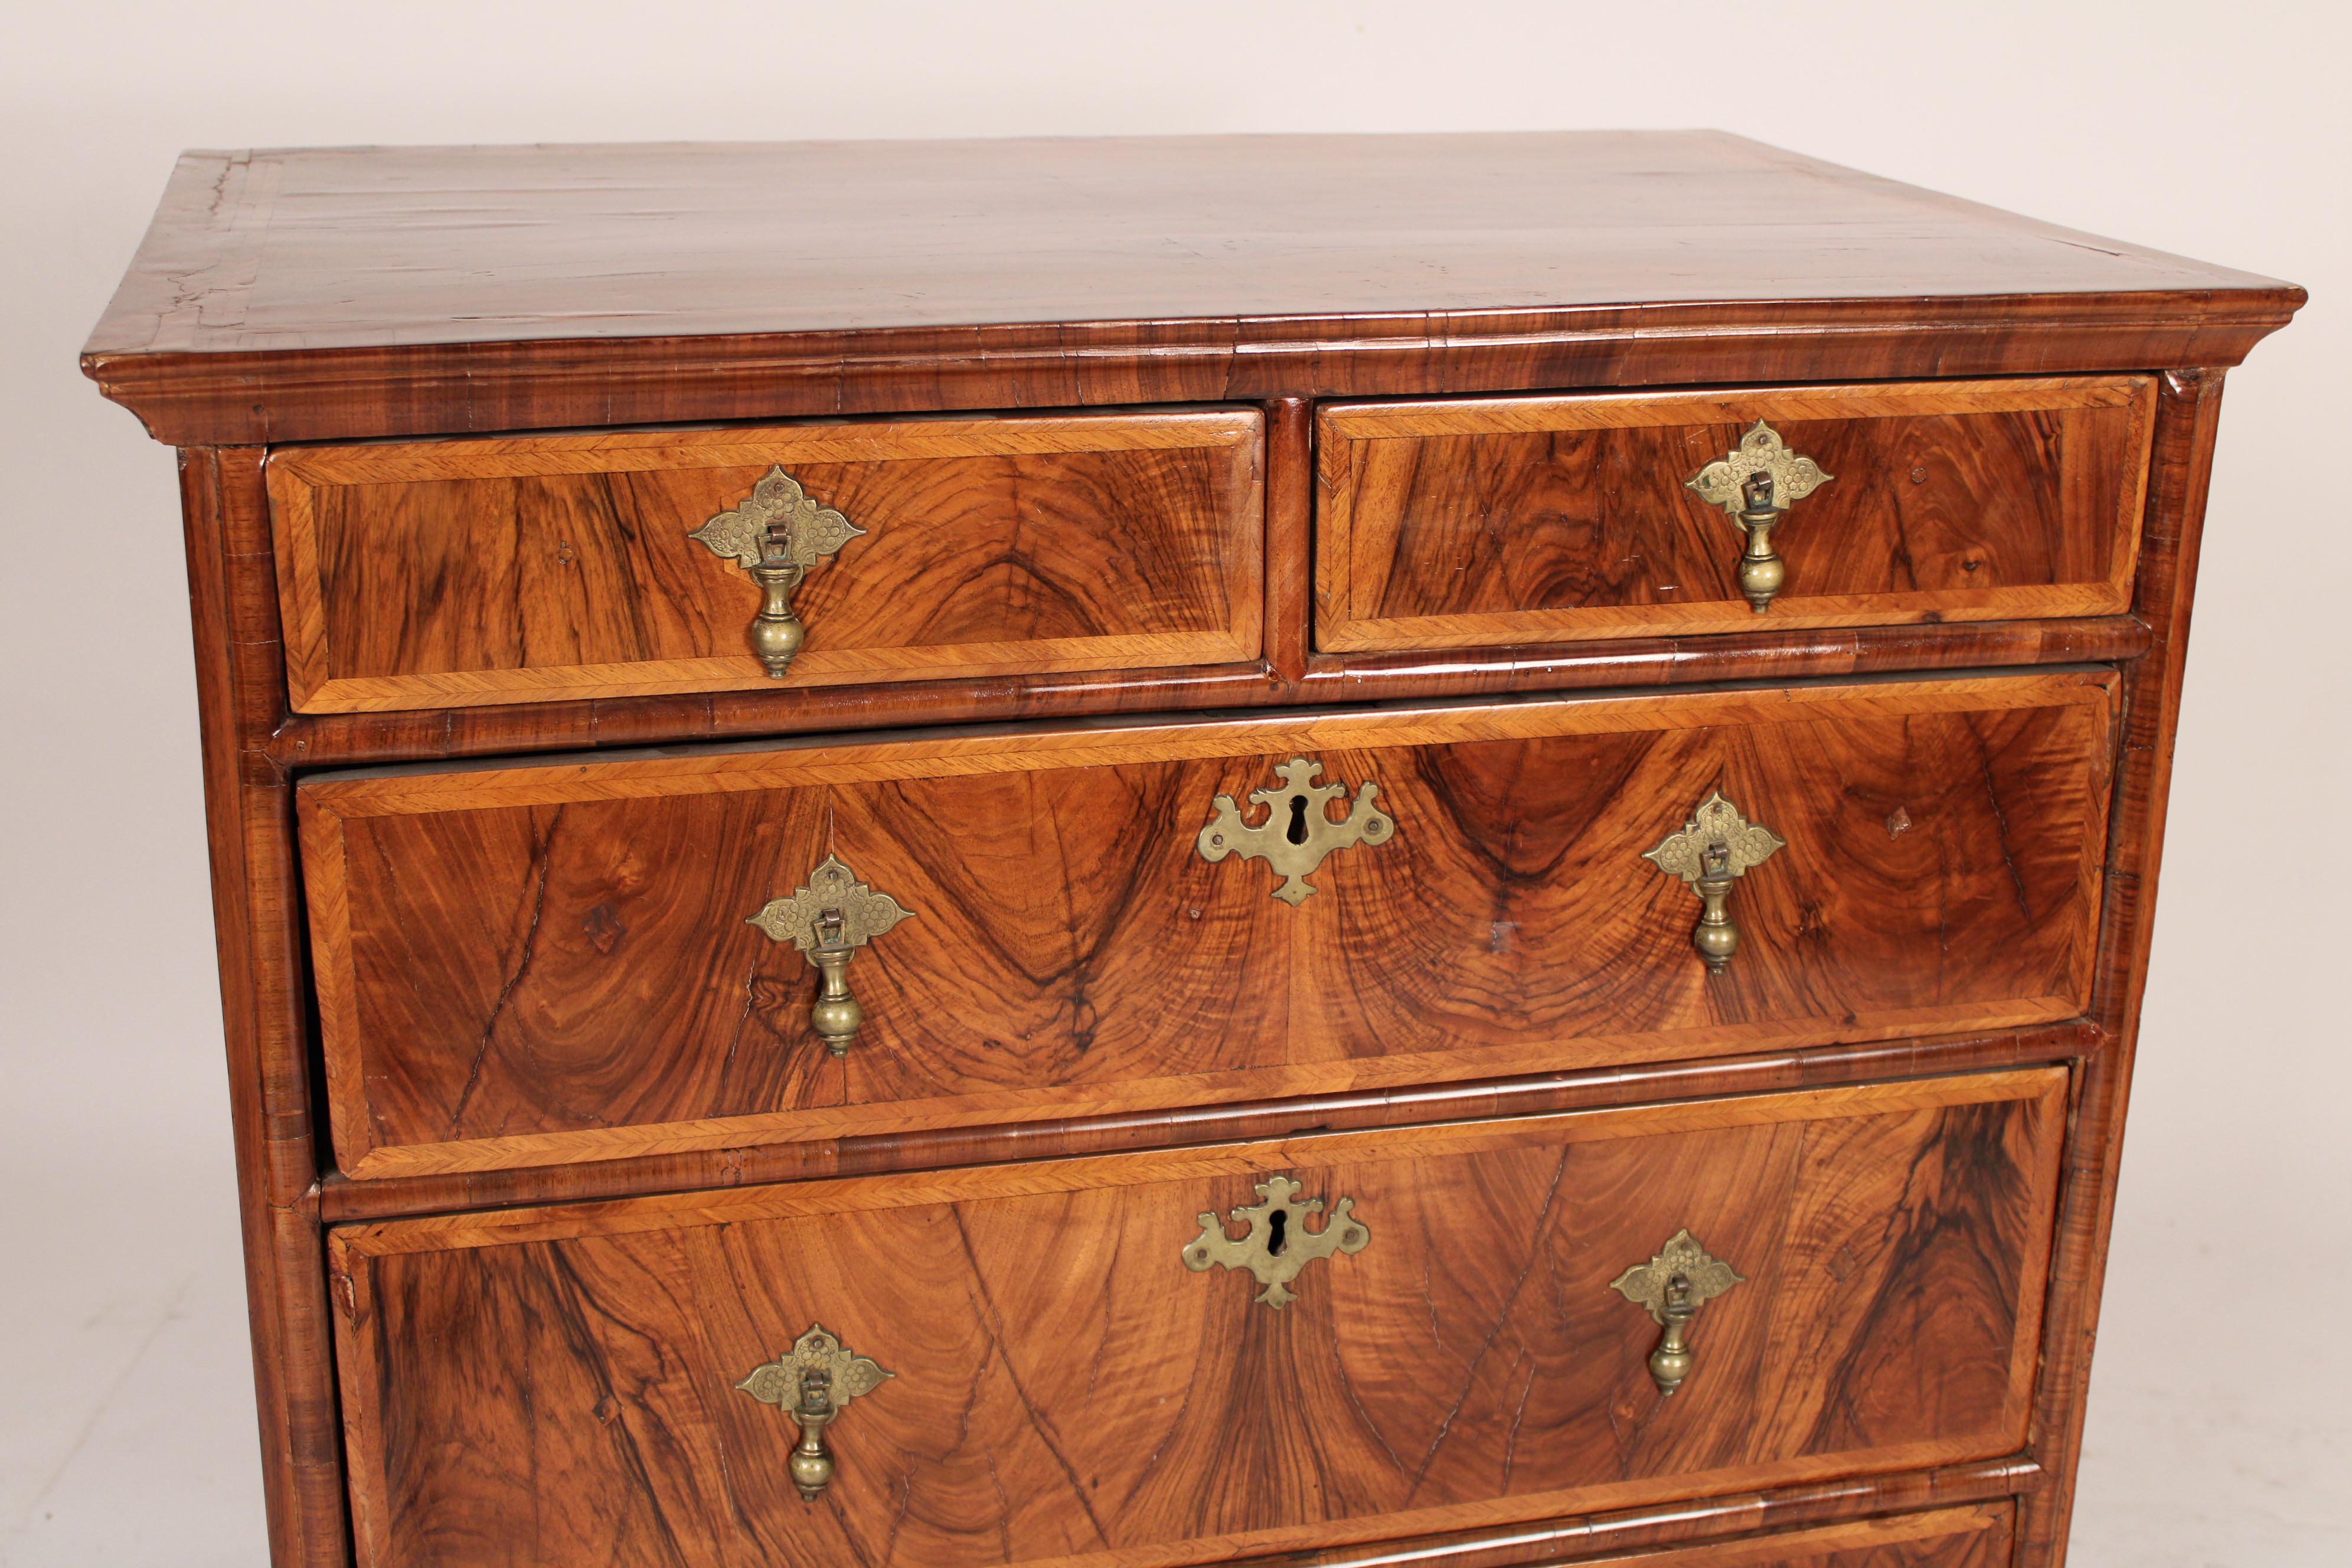 20th Century Antique Queen Anne Style Burl Walnut Chest of Drawers